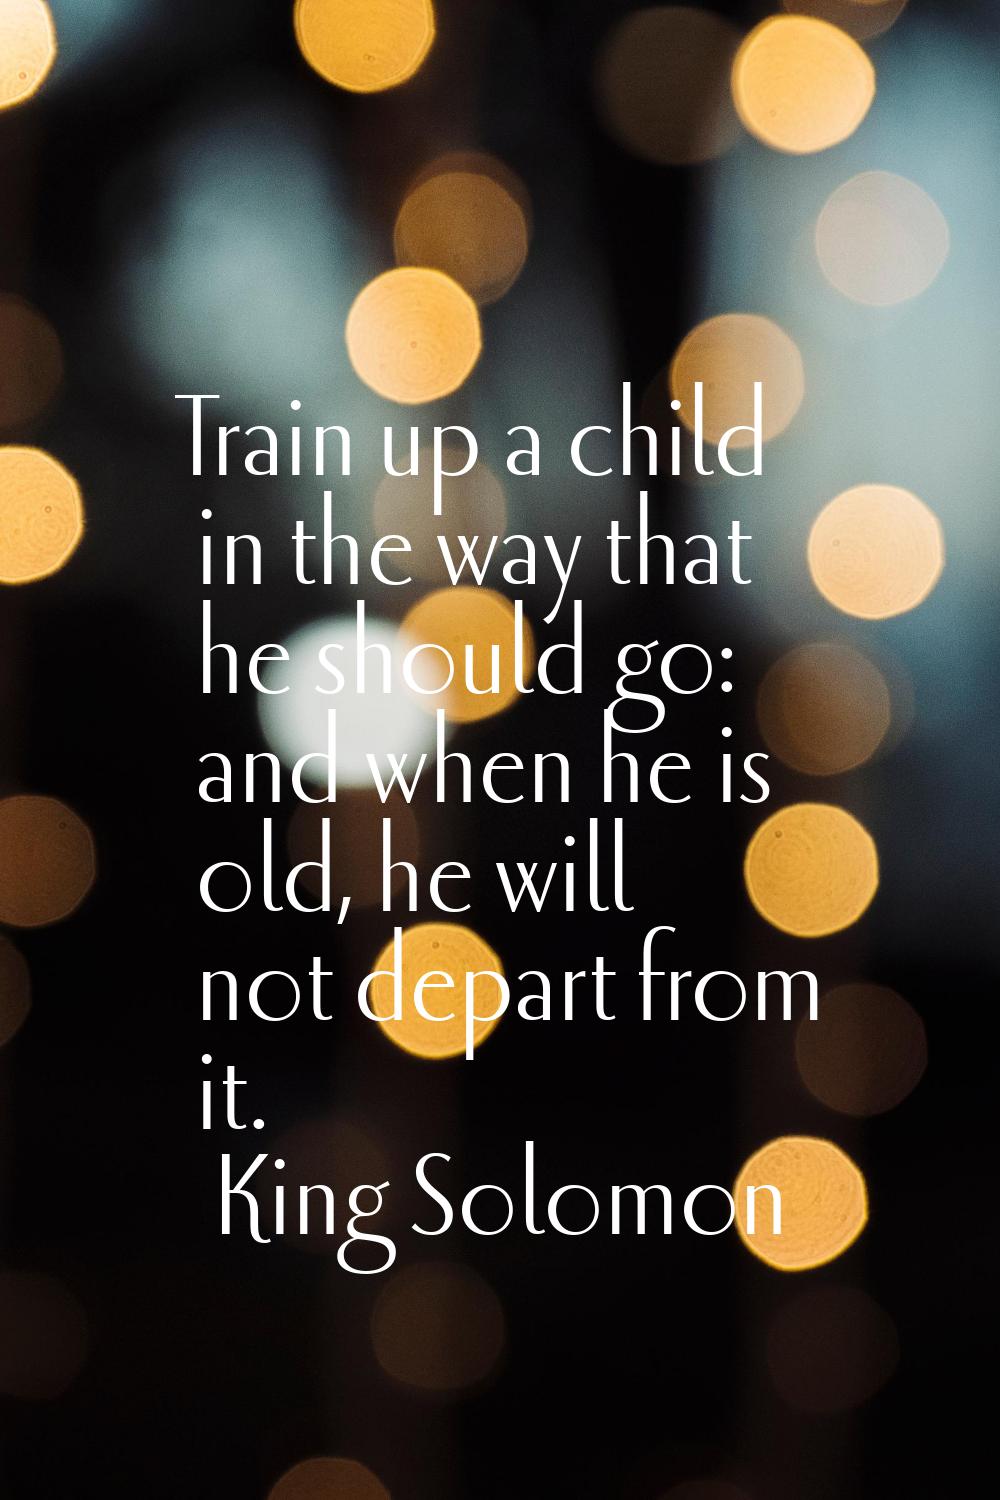 Train up a child in the way that he should go: and when he is old, he will not depart from it.